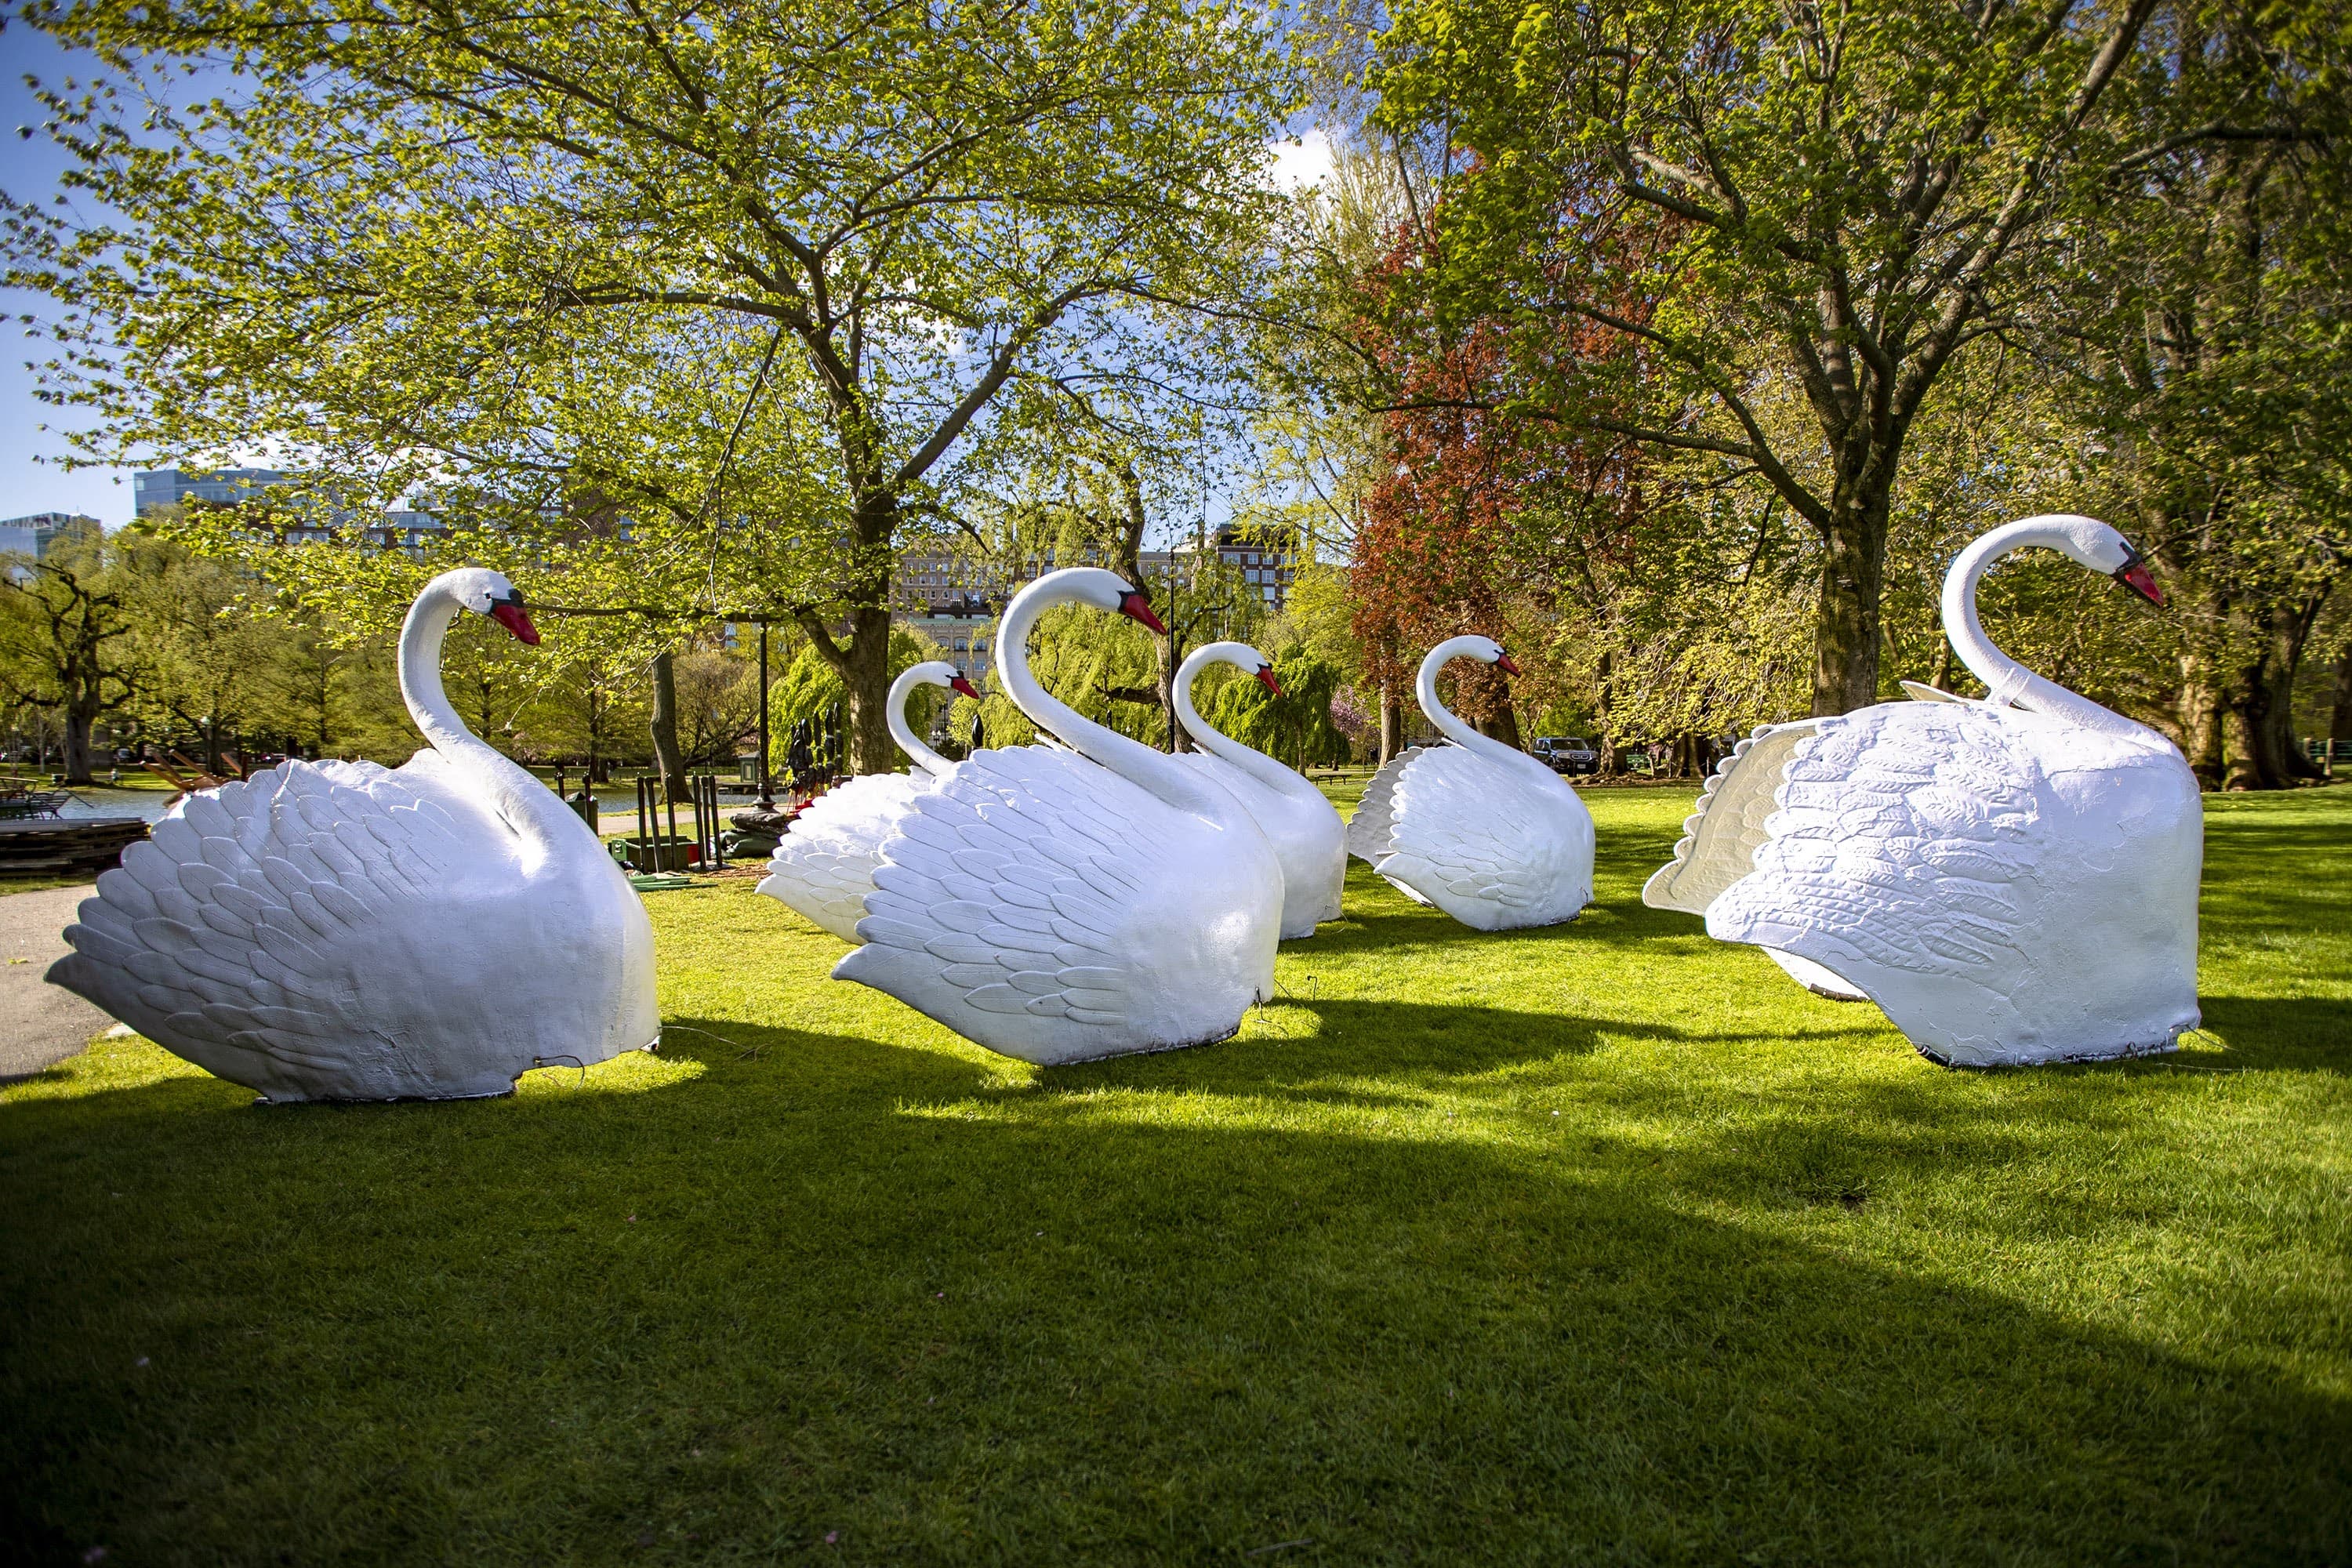 Six swan figures wait on the grass to be mounted onto their respective pontoons being assembled in the Public Garden. (Jesse Costa/WBUR)